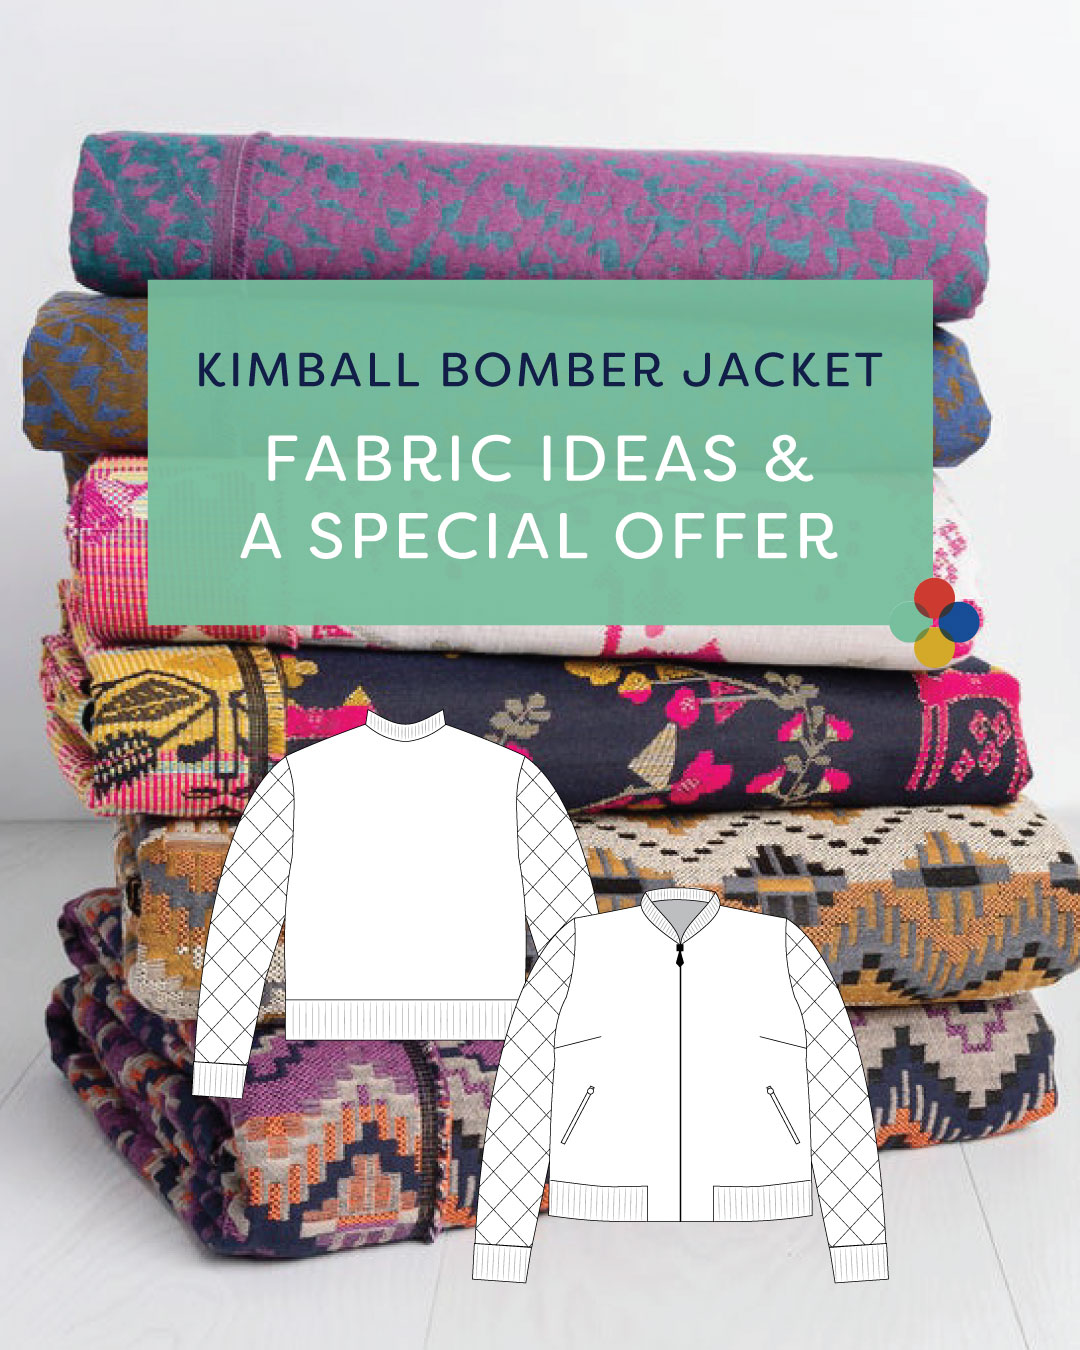 Fabric Ideas for the Kimball Bomber Jacket, and a Special Offer!